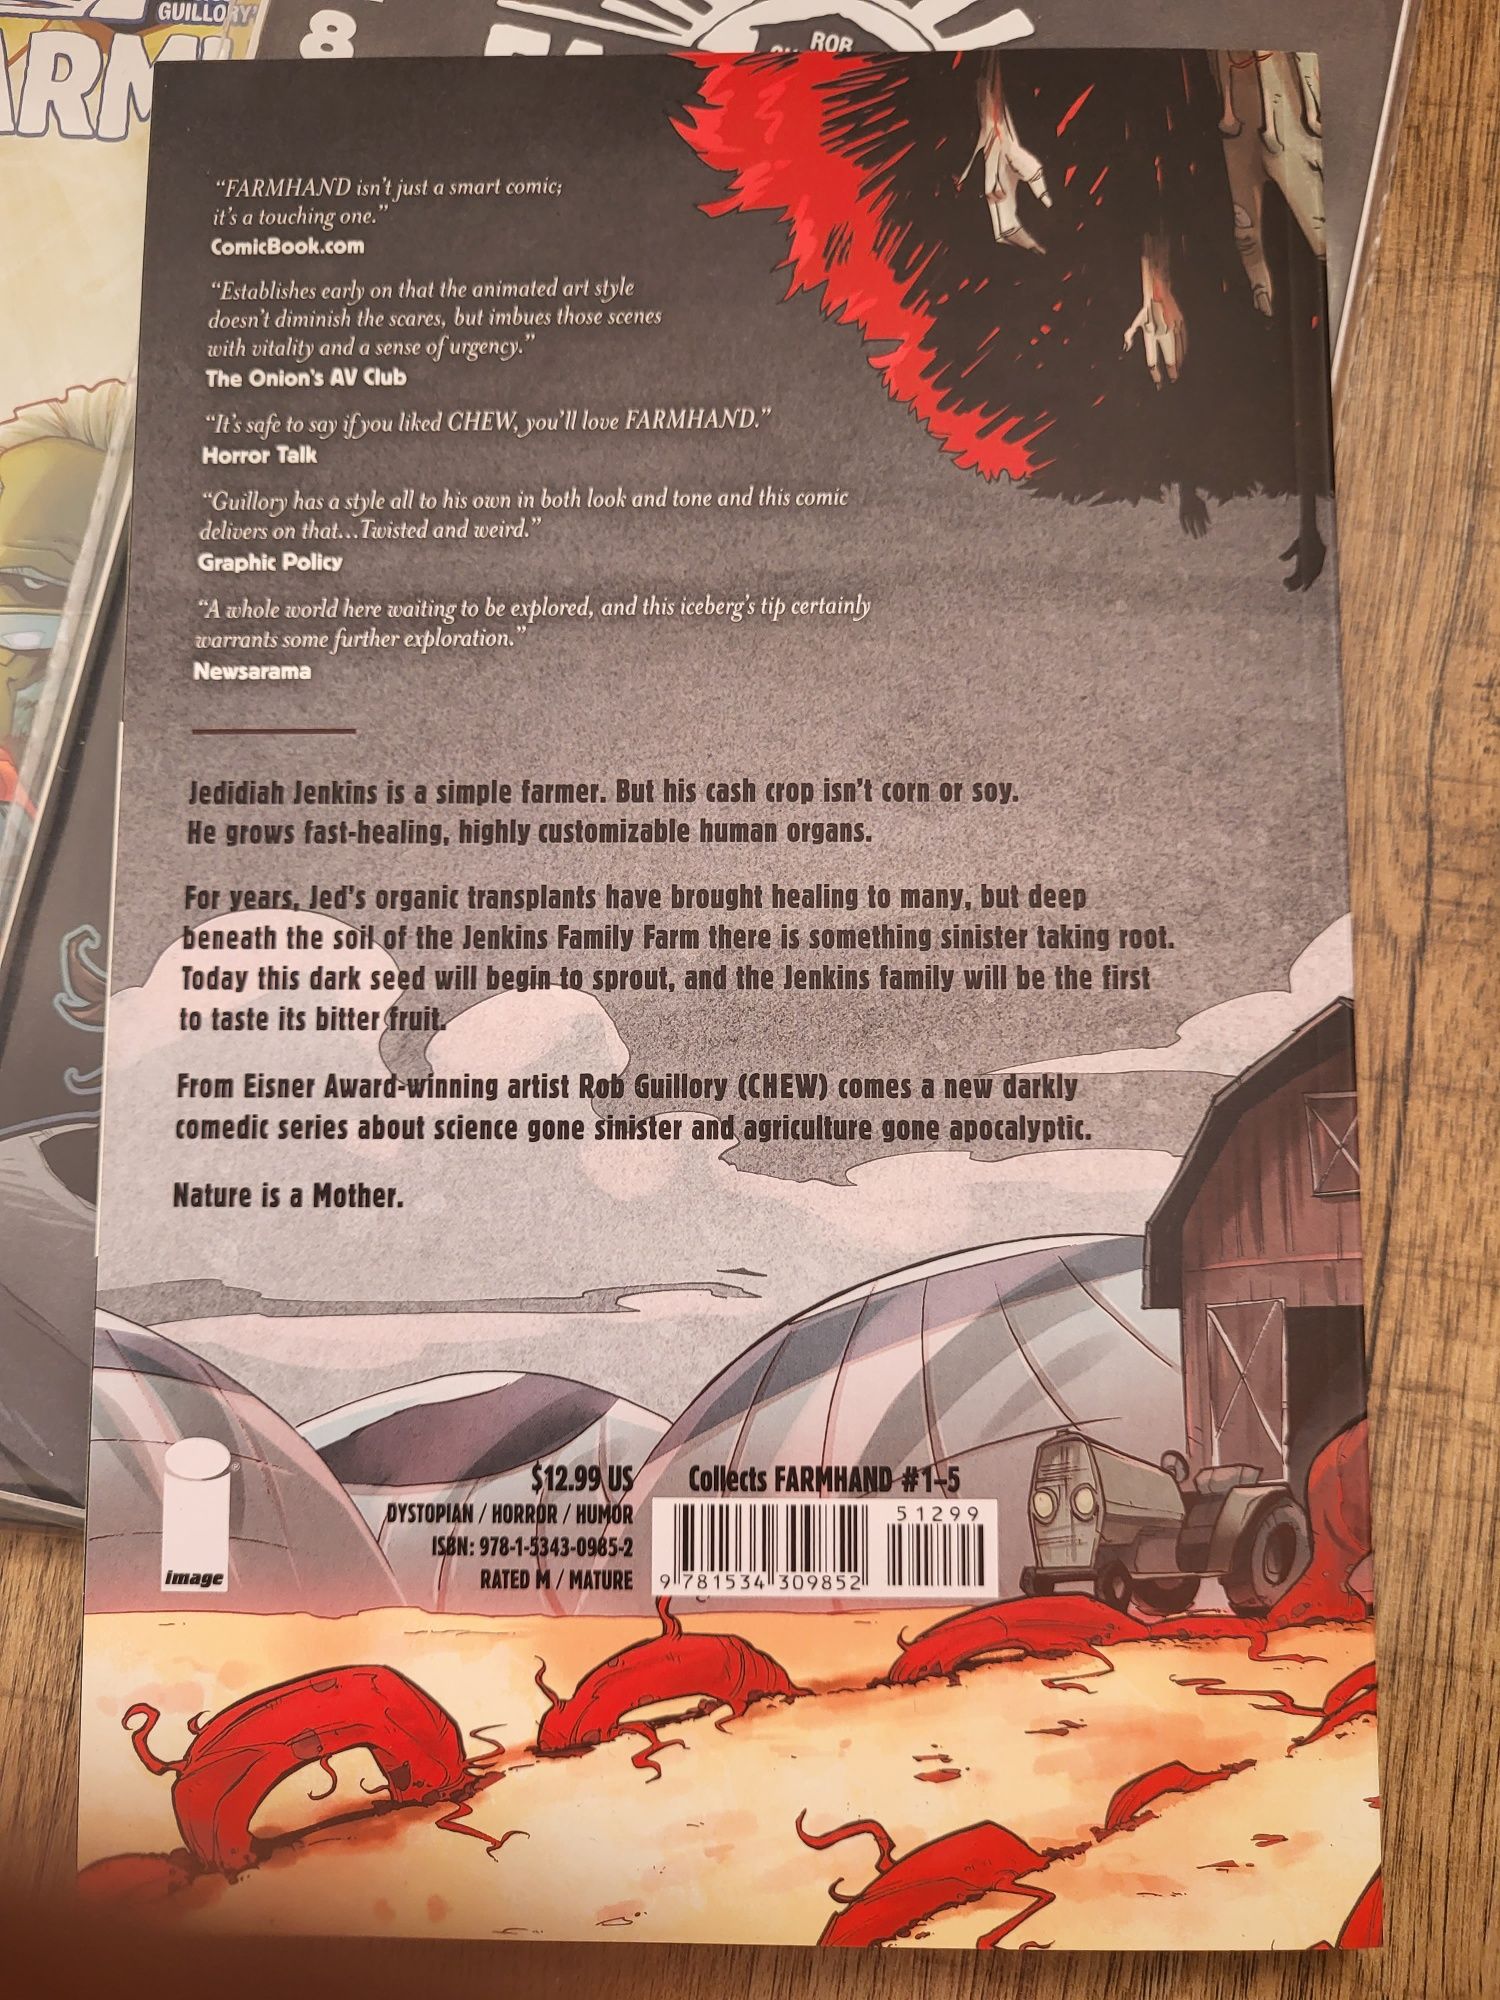 Farmhand vol 1 Rob Guillory + zeszyty 6-8